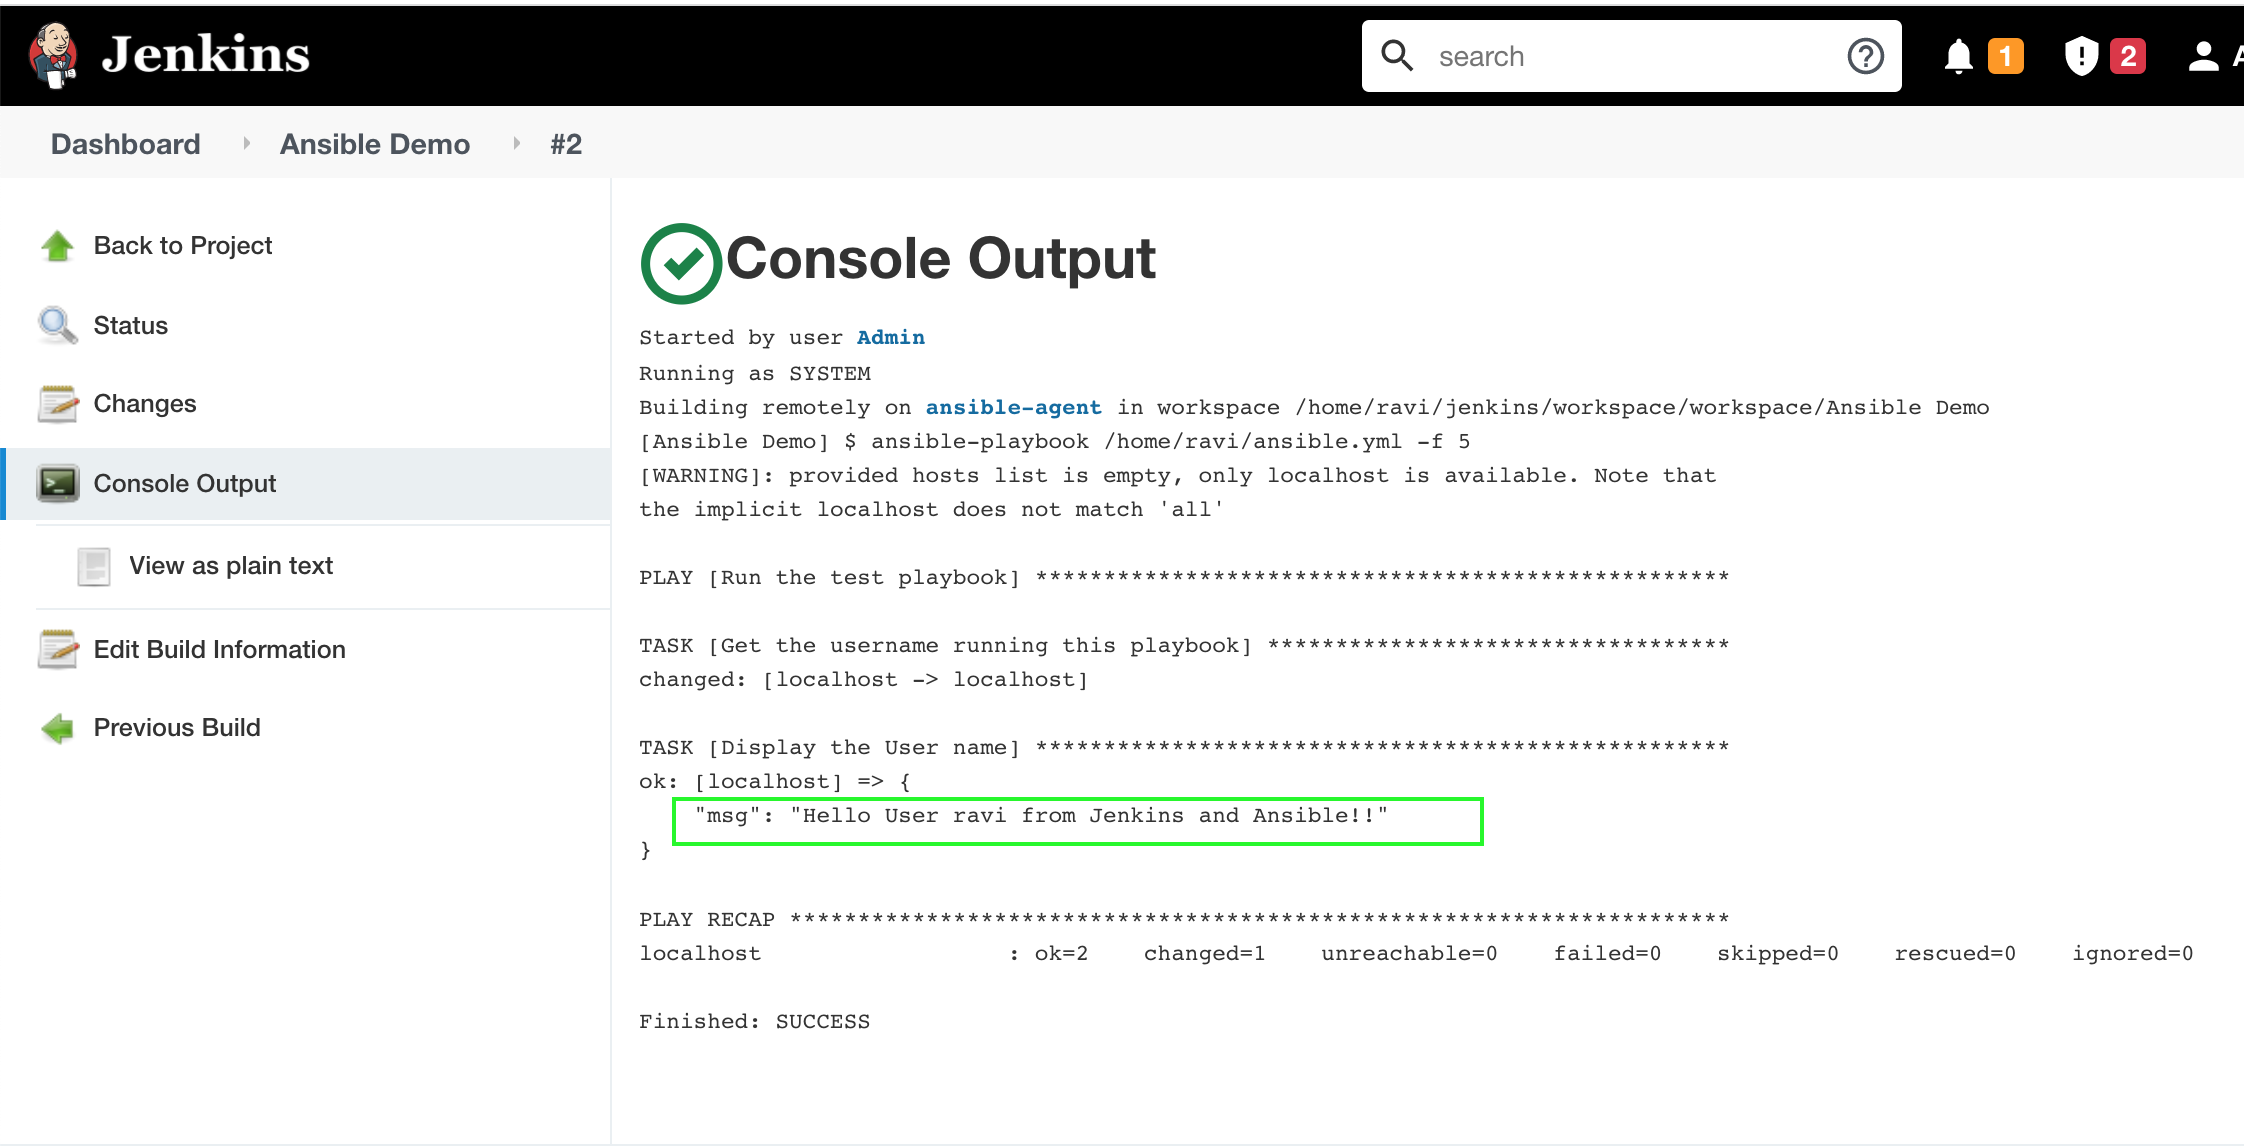 Jenkins Console Log to show successful Ansible playbook execution